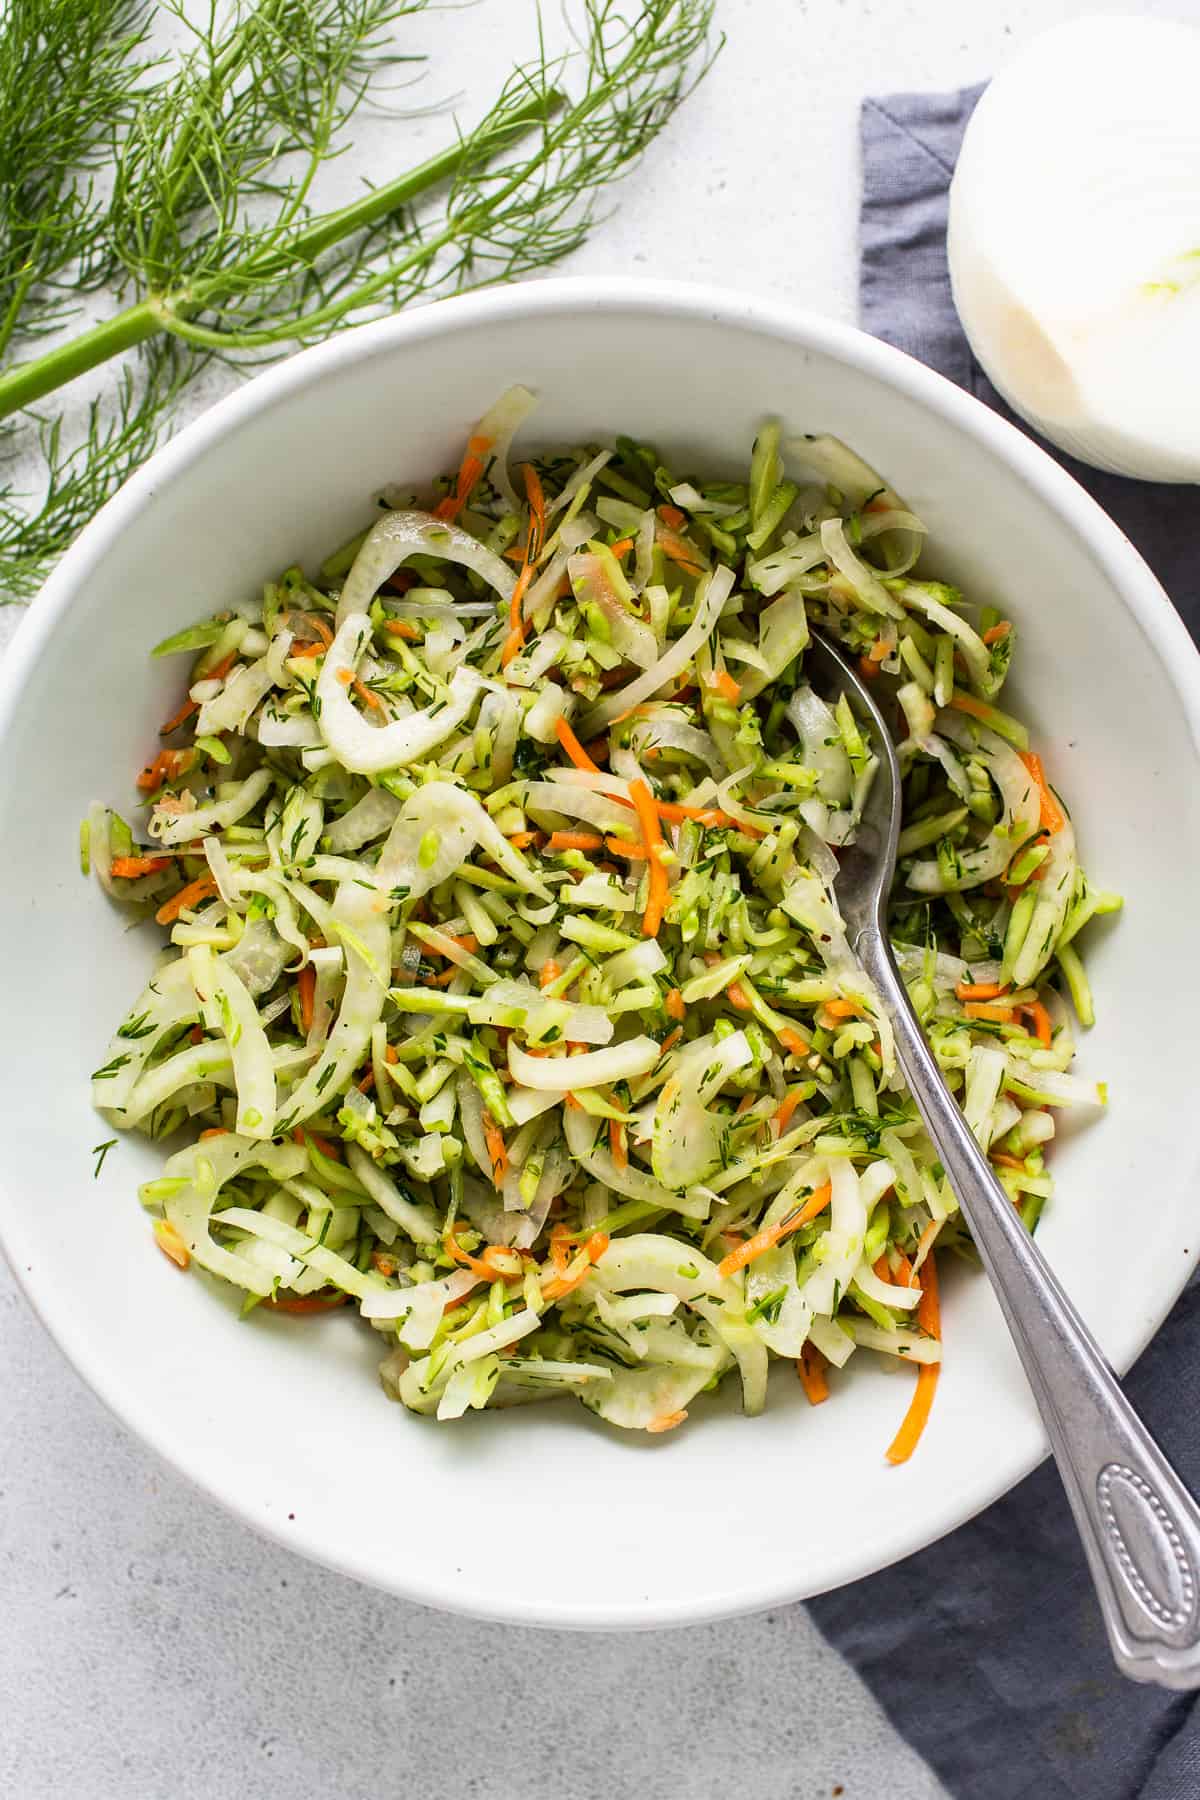 A bowl of dill slaw with carrots and onions.